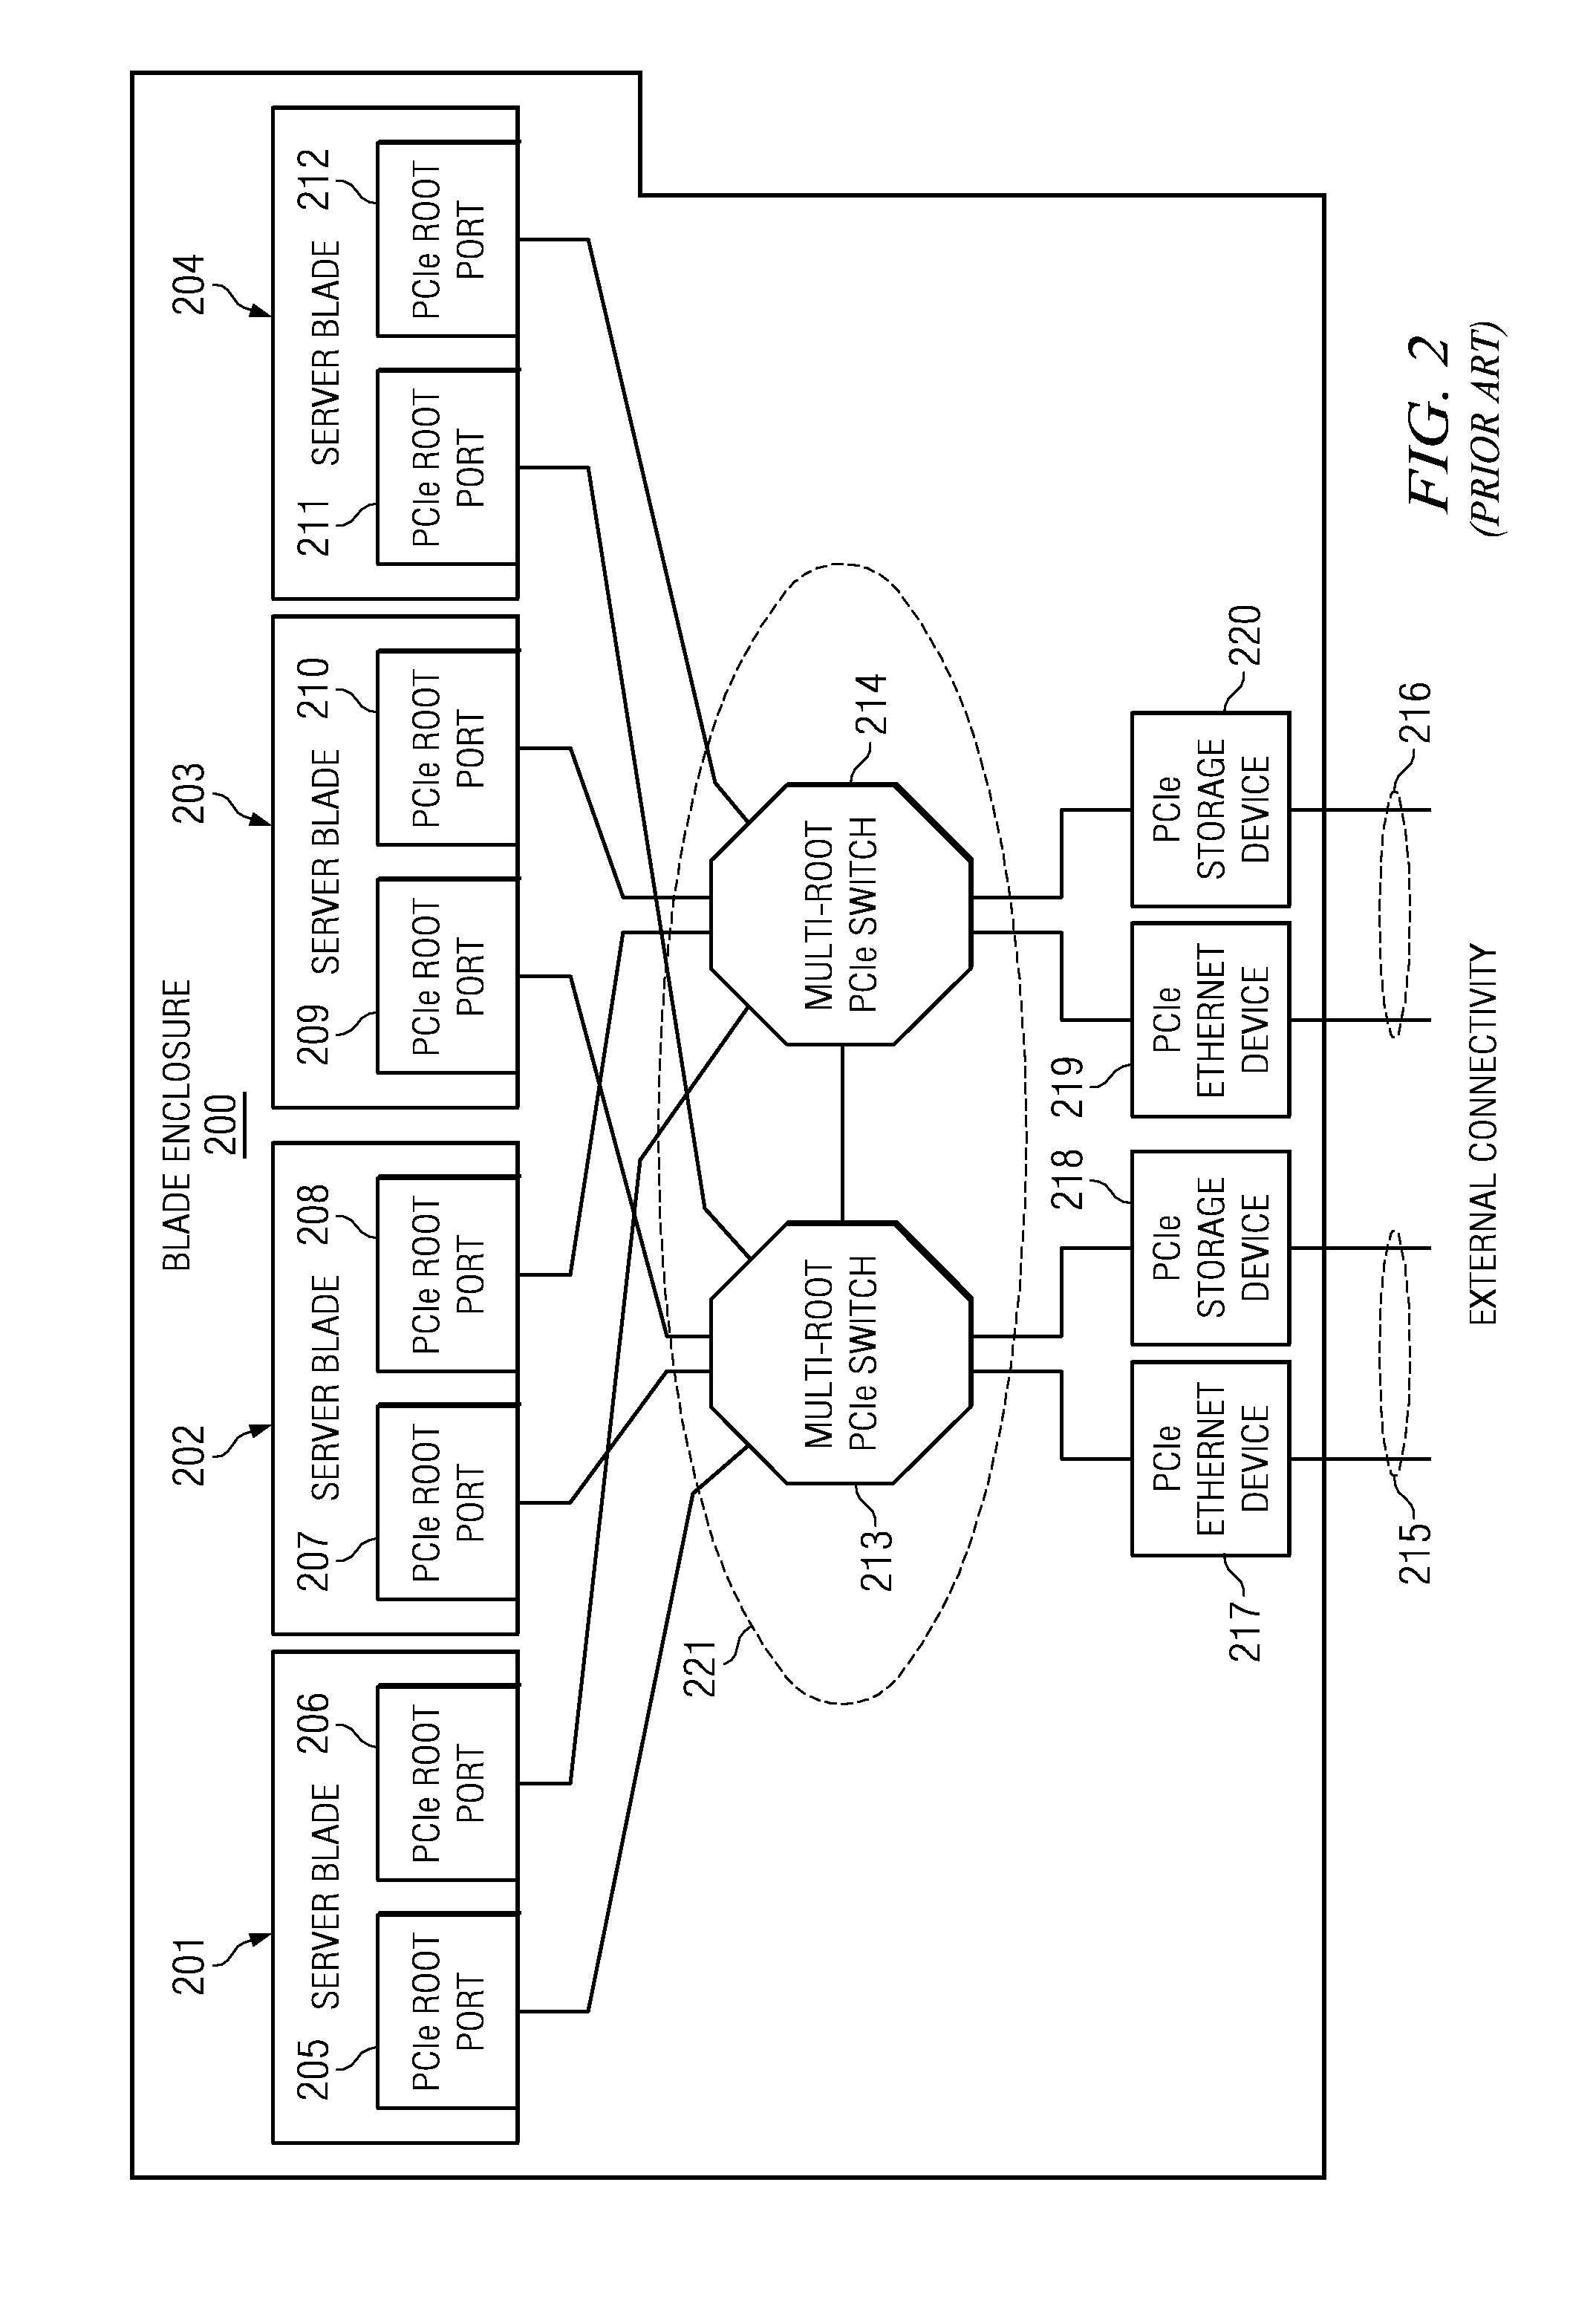 Multi-root I/O virtualization using separate management facilities of multiple logical partitions